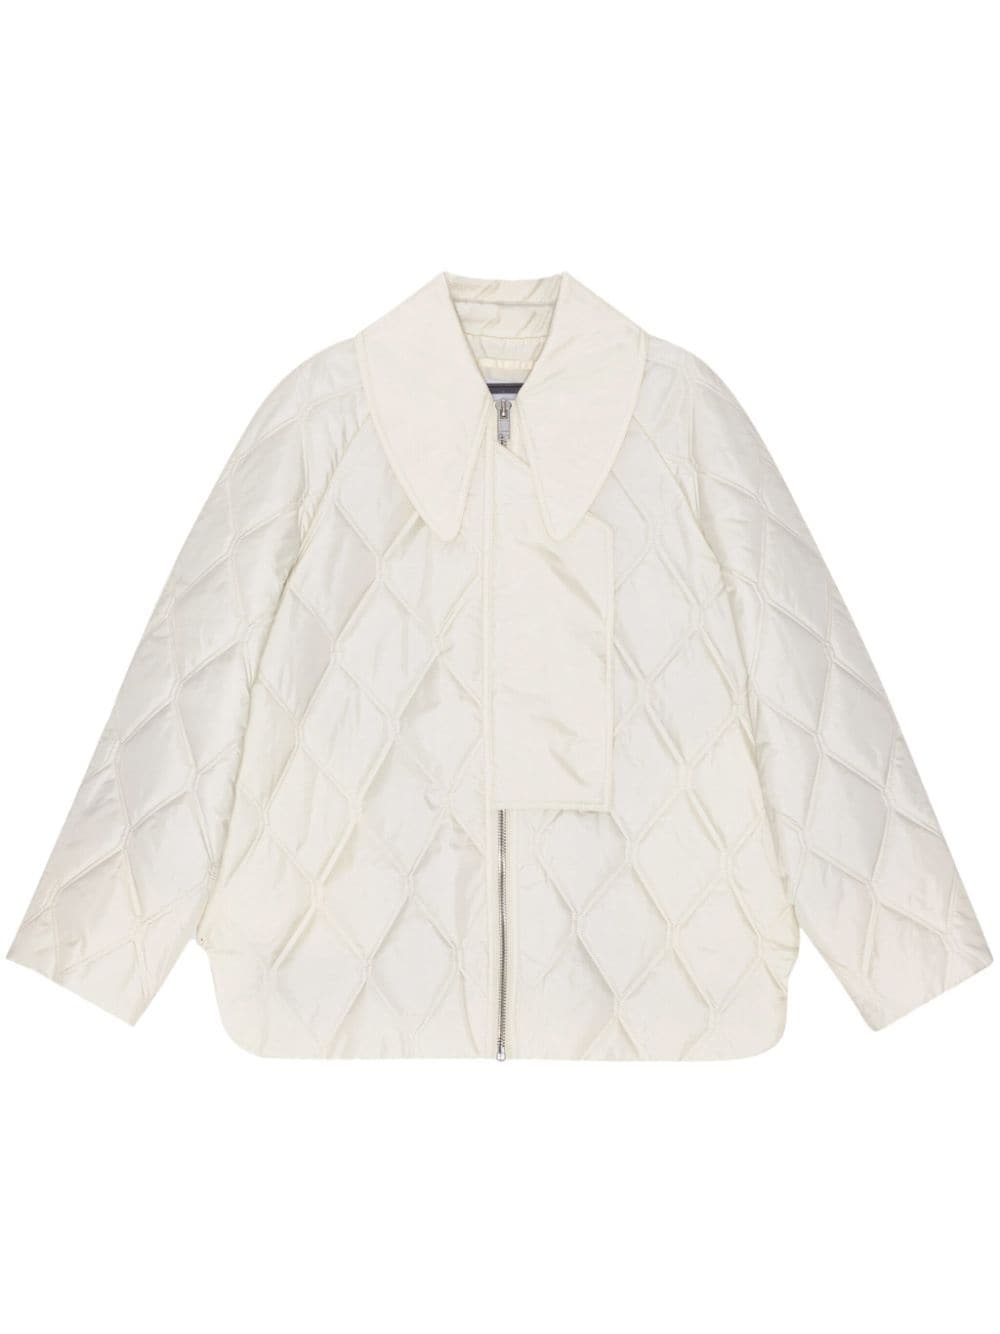 pointed-collar diamond quilting jacket - 1